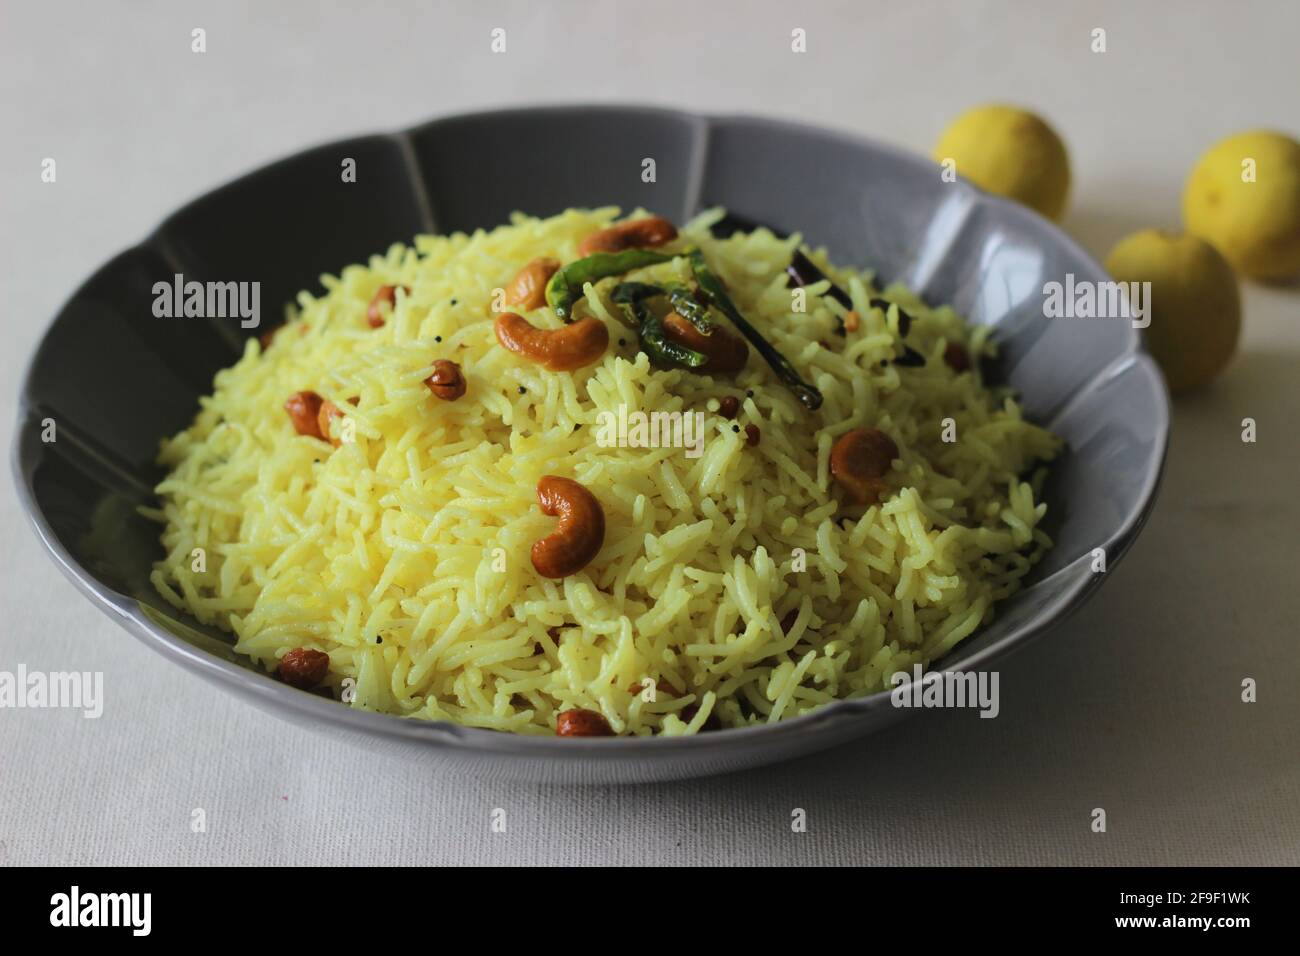 Lemon rice prepared by seasoning cooked rice with mustard seeds, fried lentils, peanuts, cashew nuts, green chillies, dry red chillies, curry leaves, Stock Photo